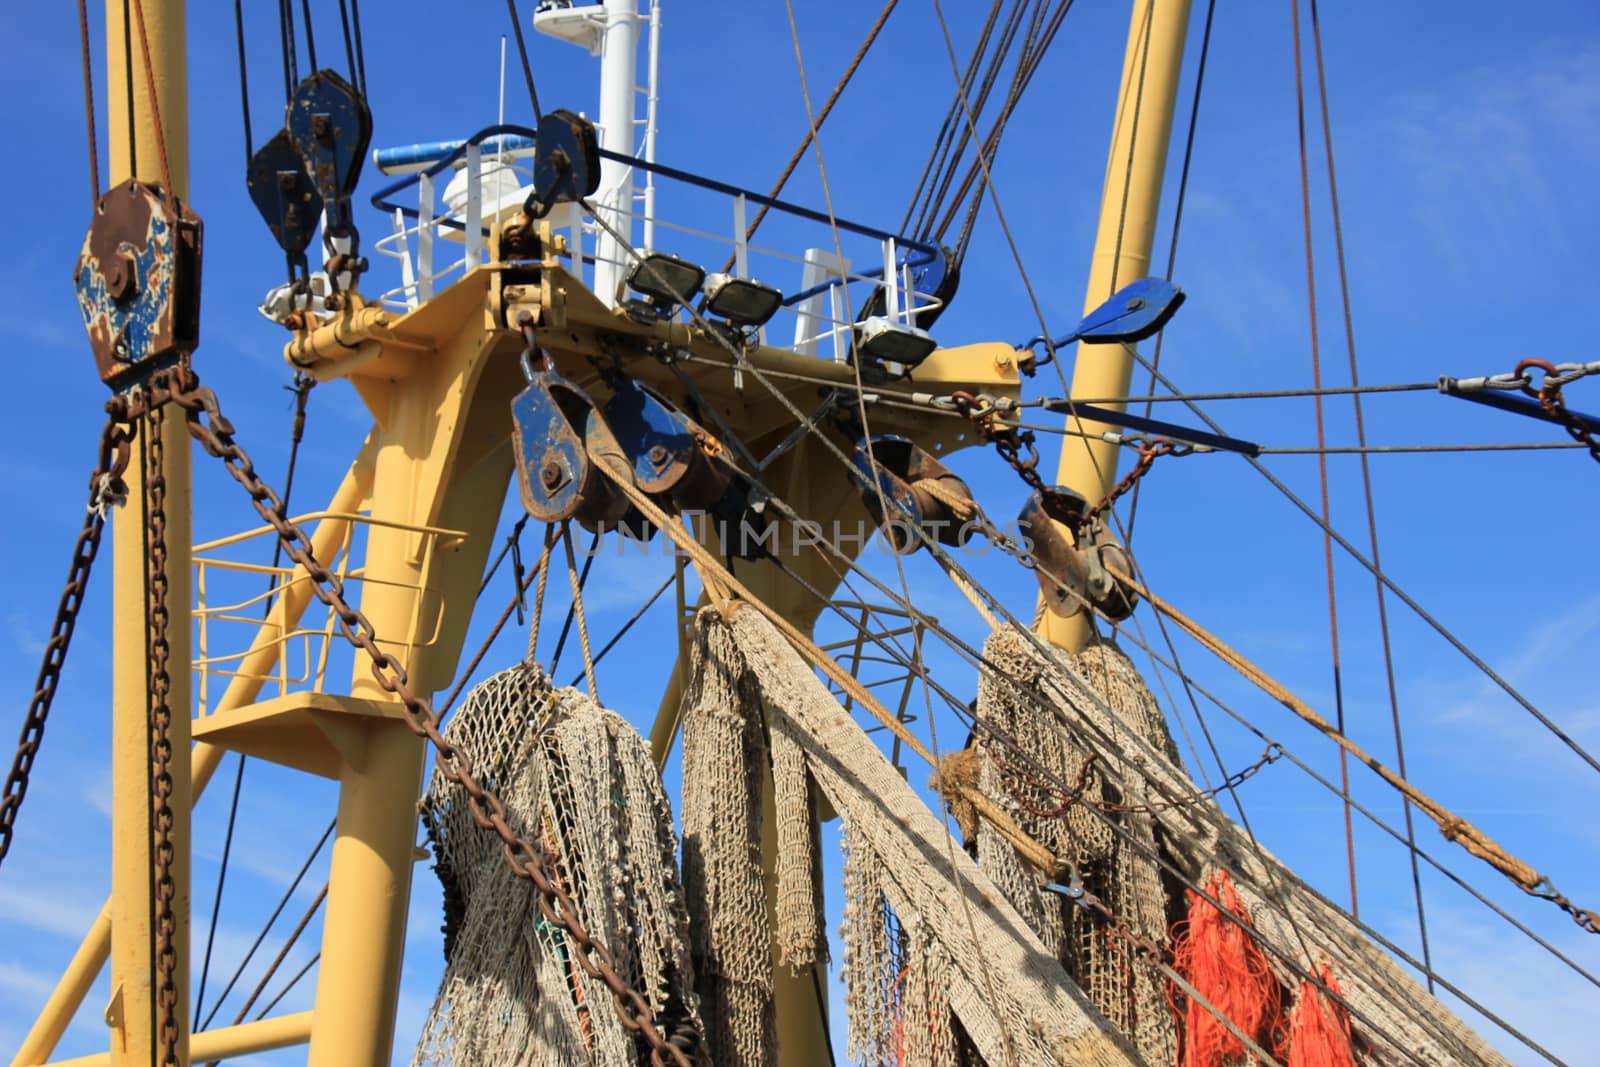 Fishing nets on a mid size trawler